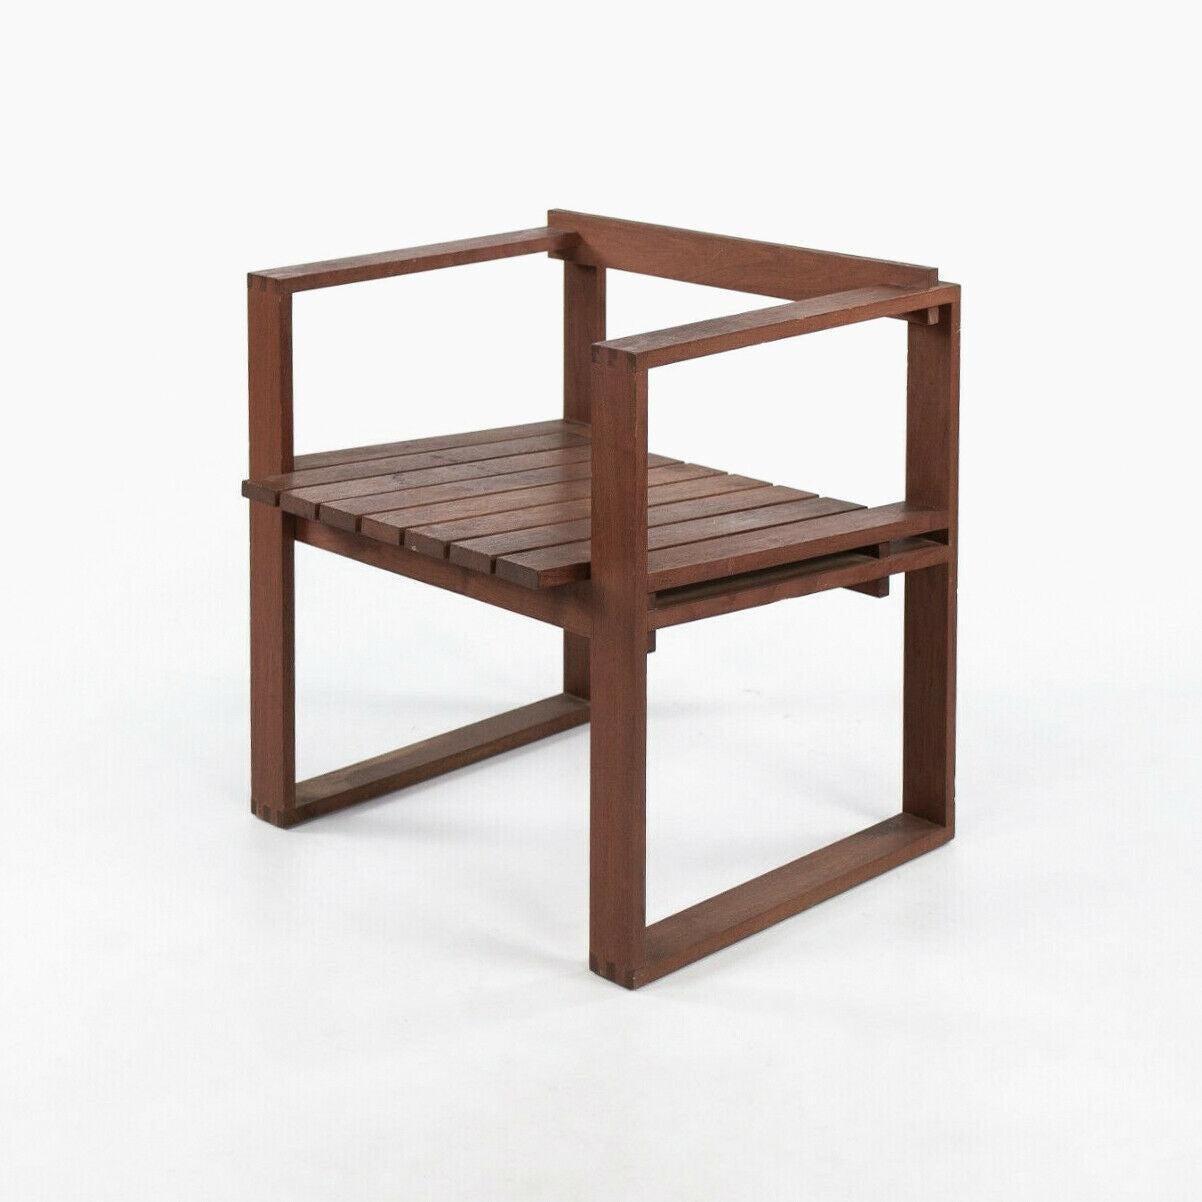 Listed for sale is a very rare Bodil Kjaer for CI Designs teak slat-seat chair. There are a few notable details to mention. First off, vintage Bodil Kjaer furniture is unbelievably rare and only recently have manufacturers such as Fritz Hansen begun